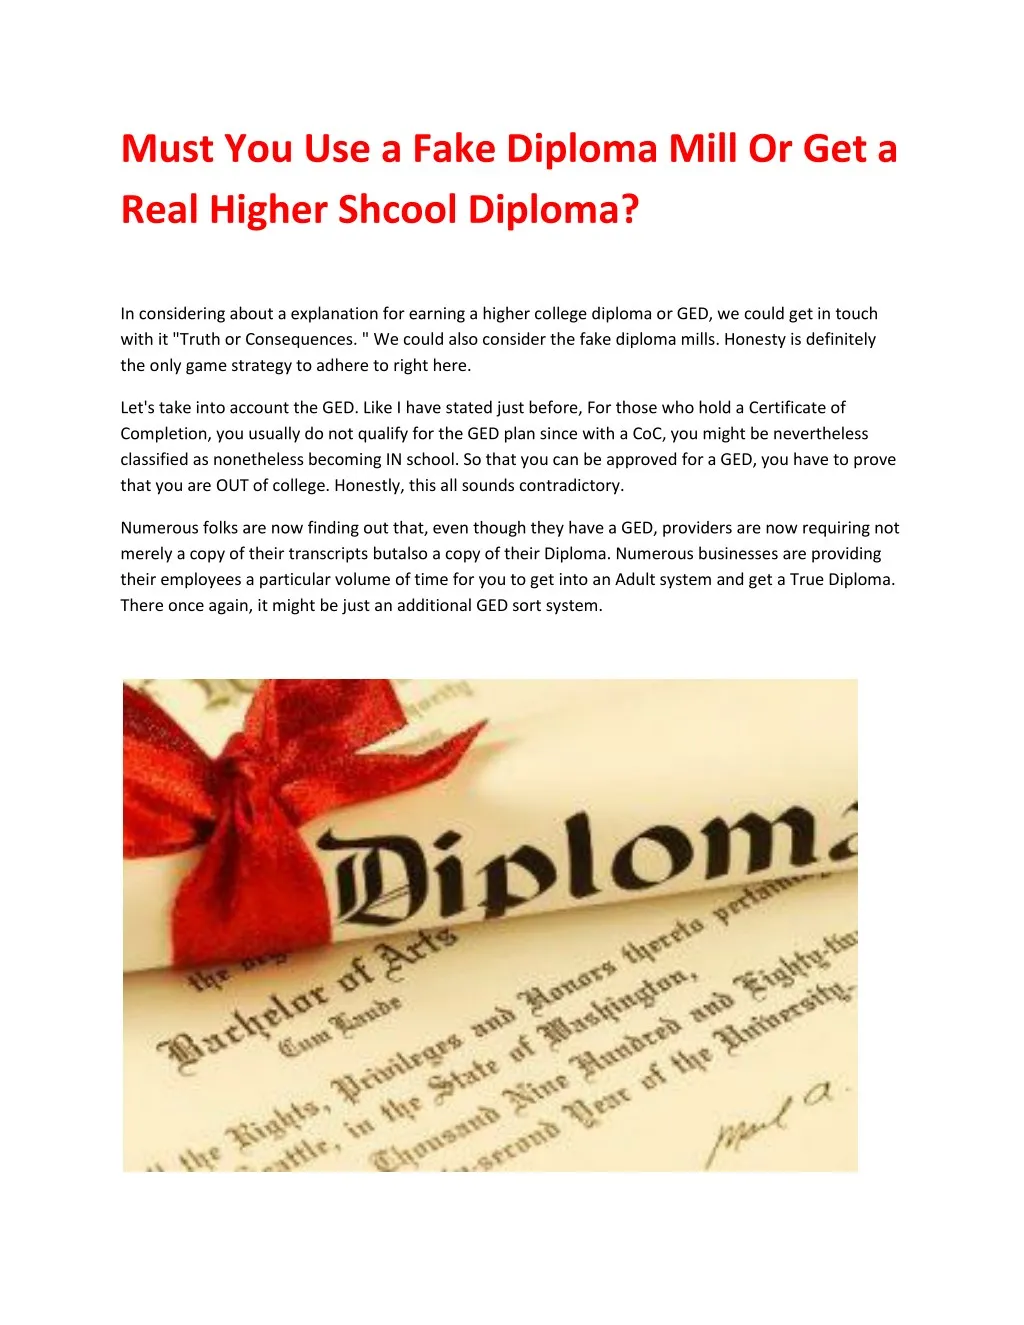 must you use a fake diploma mill or get a real